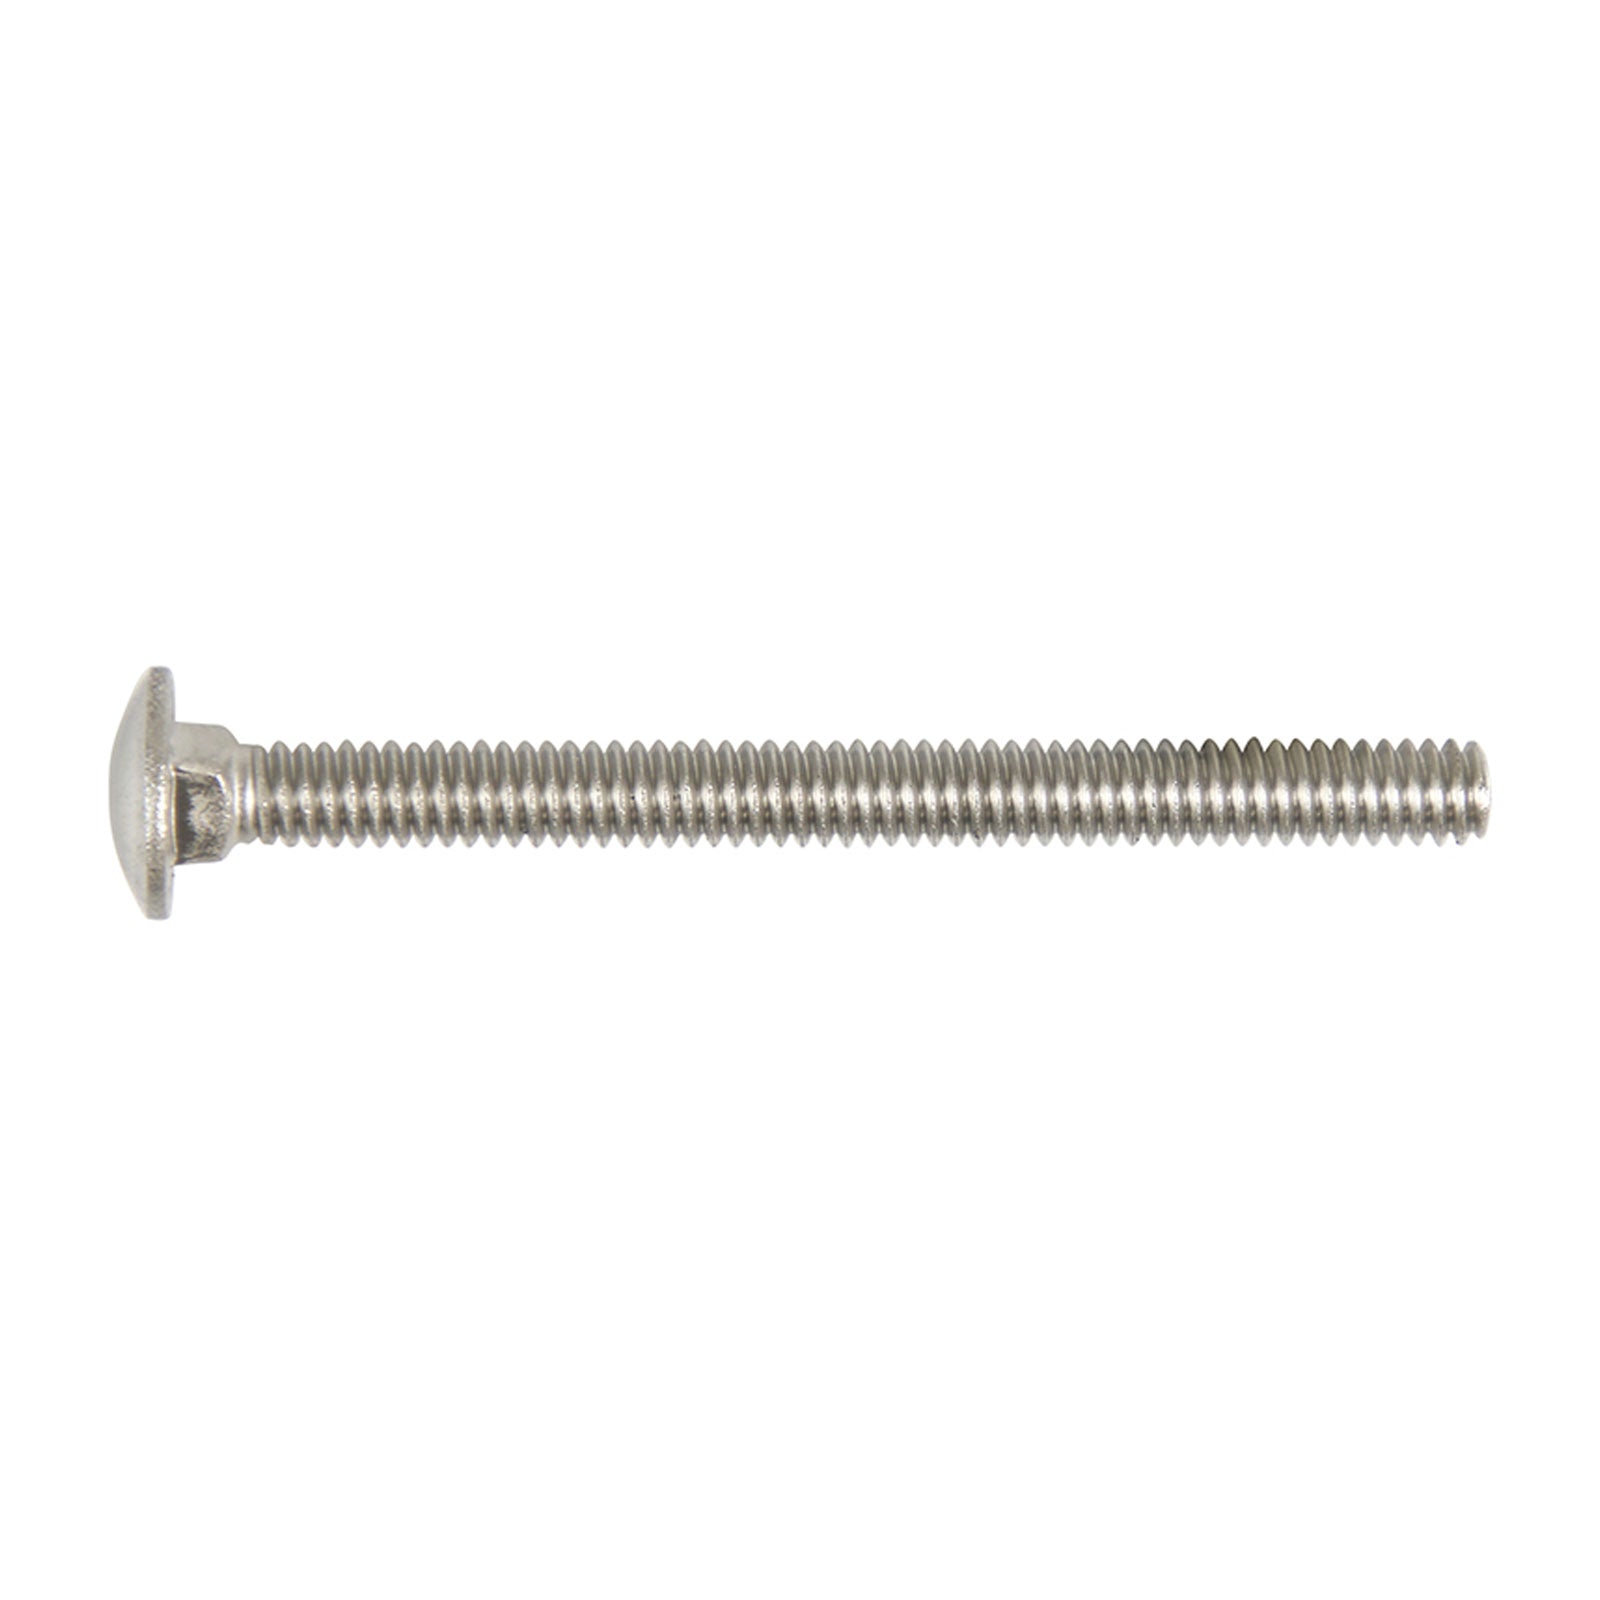 1/4"-20 x 3" Conquest Carriage Bolt - 304 Stainless Steel